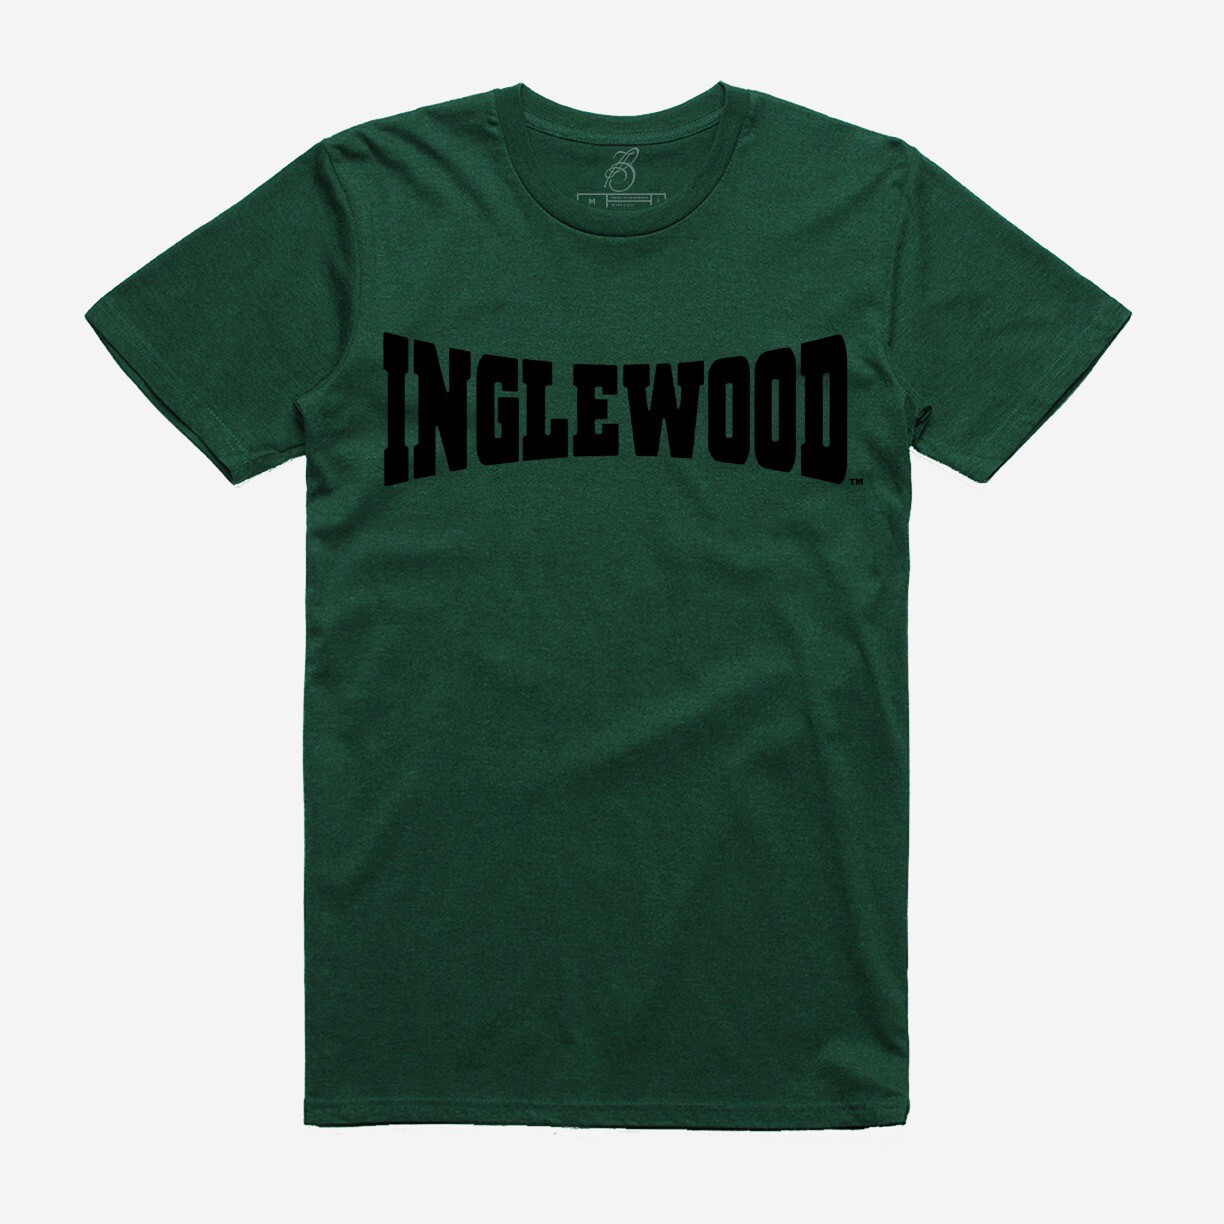 "Forest Green Inglewood T-shirt"